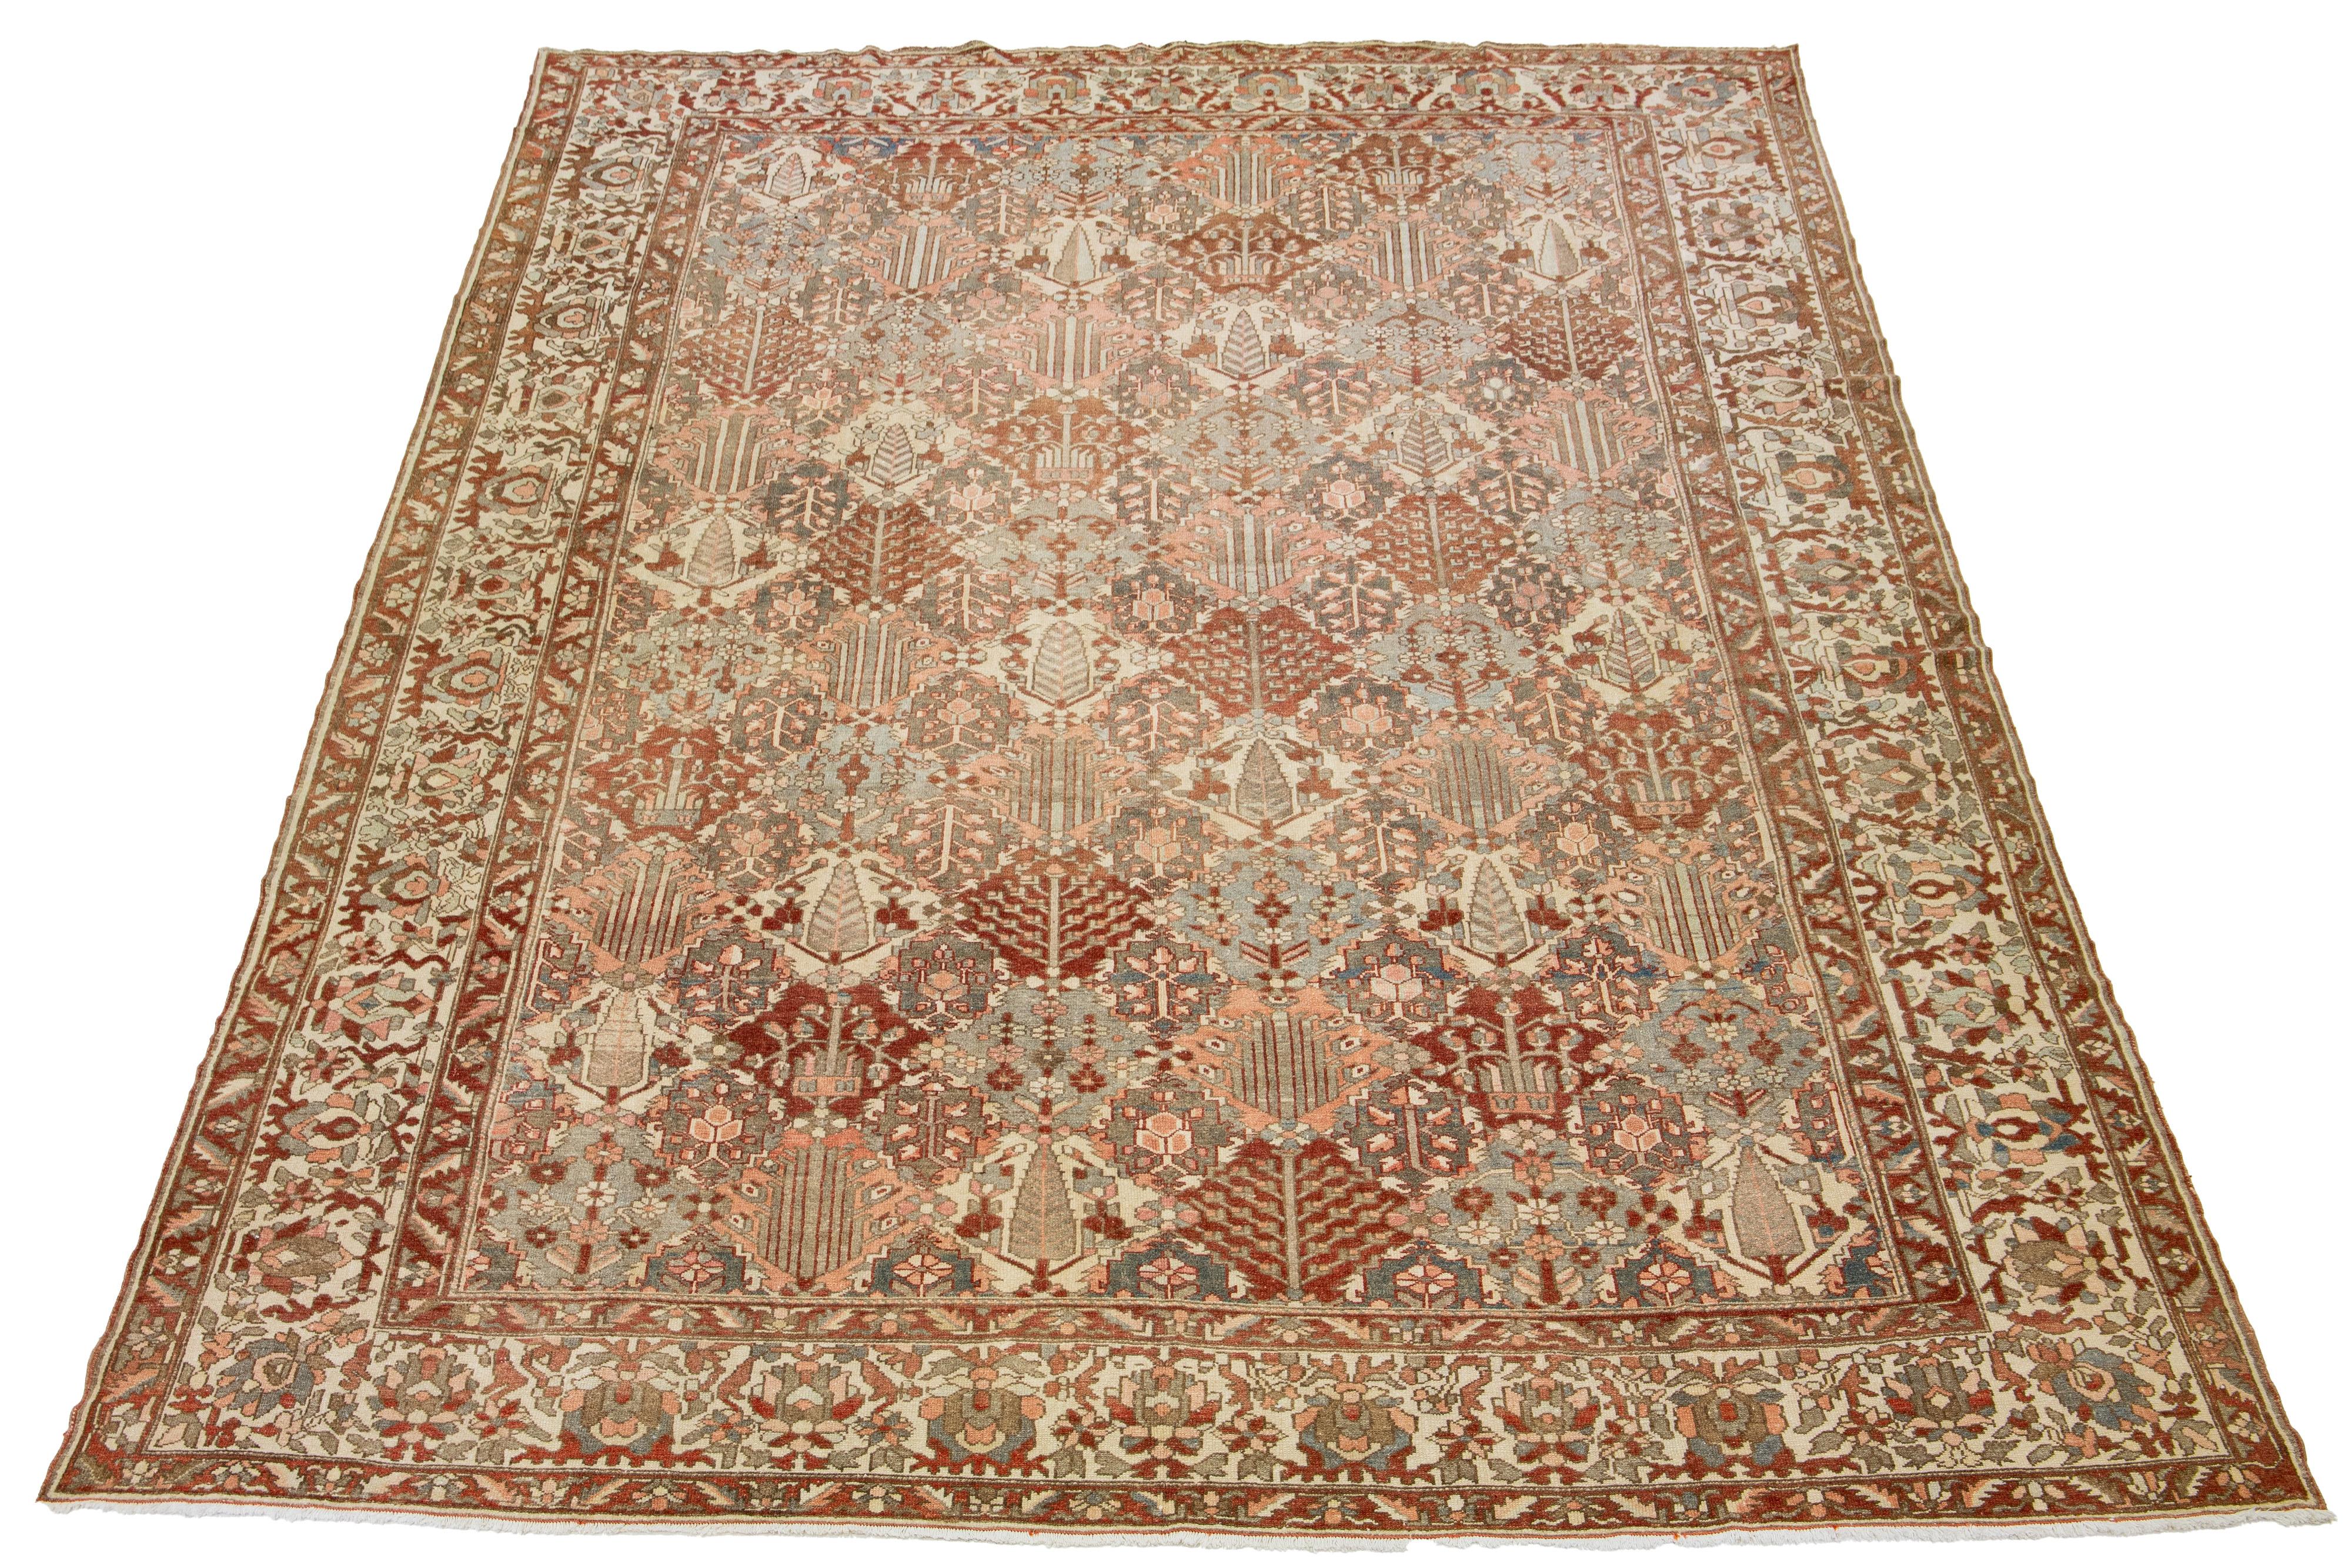 Beautiful Antique Bakhtiari hand-knotted wool rug with a gray, red-rust, beige, and pink color field. This Persian piece has an all-over geometric floral design.

This rug measures 13'1